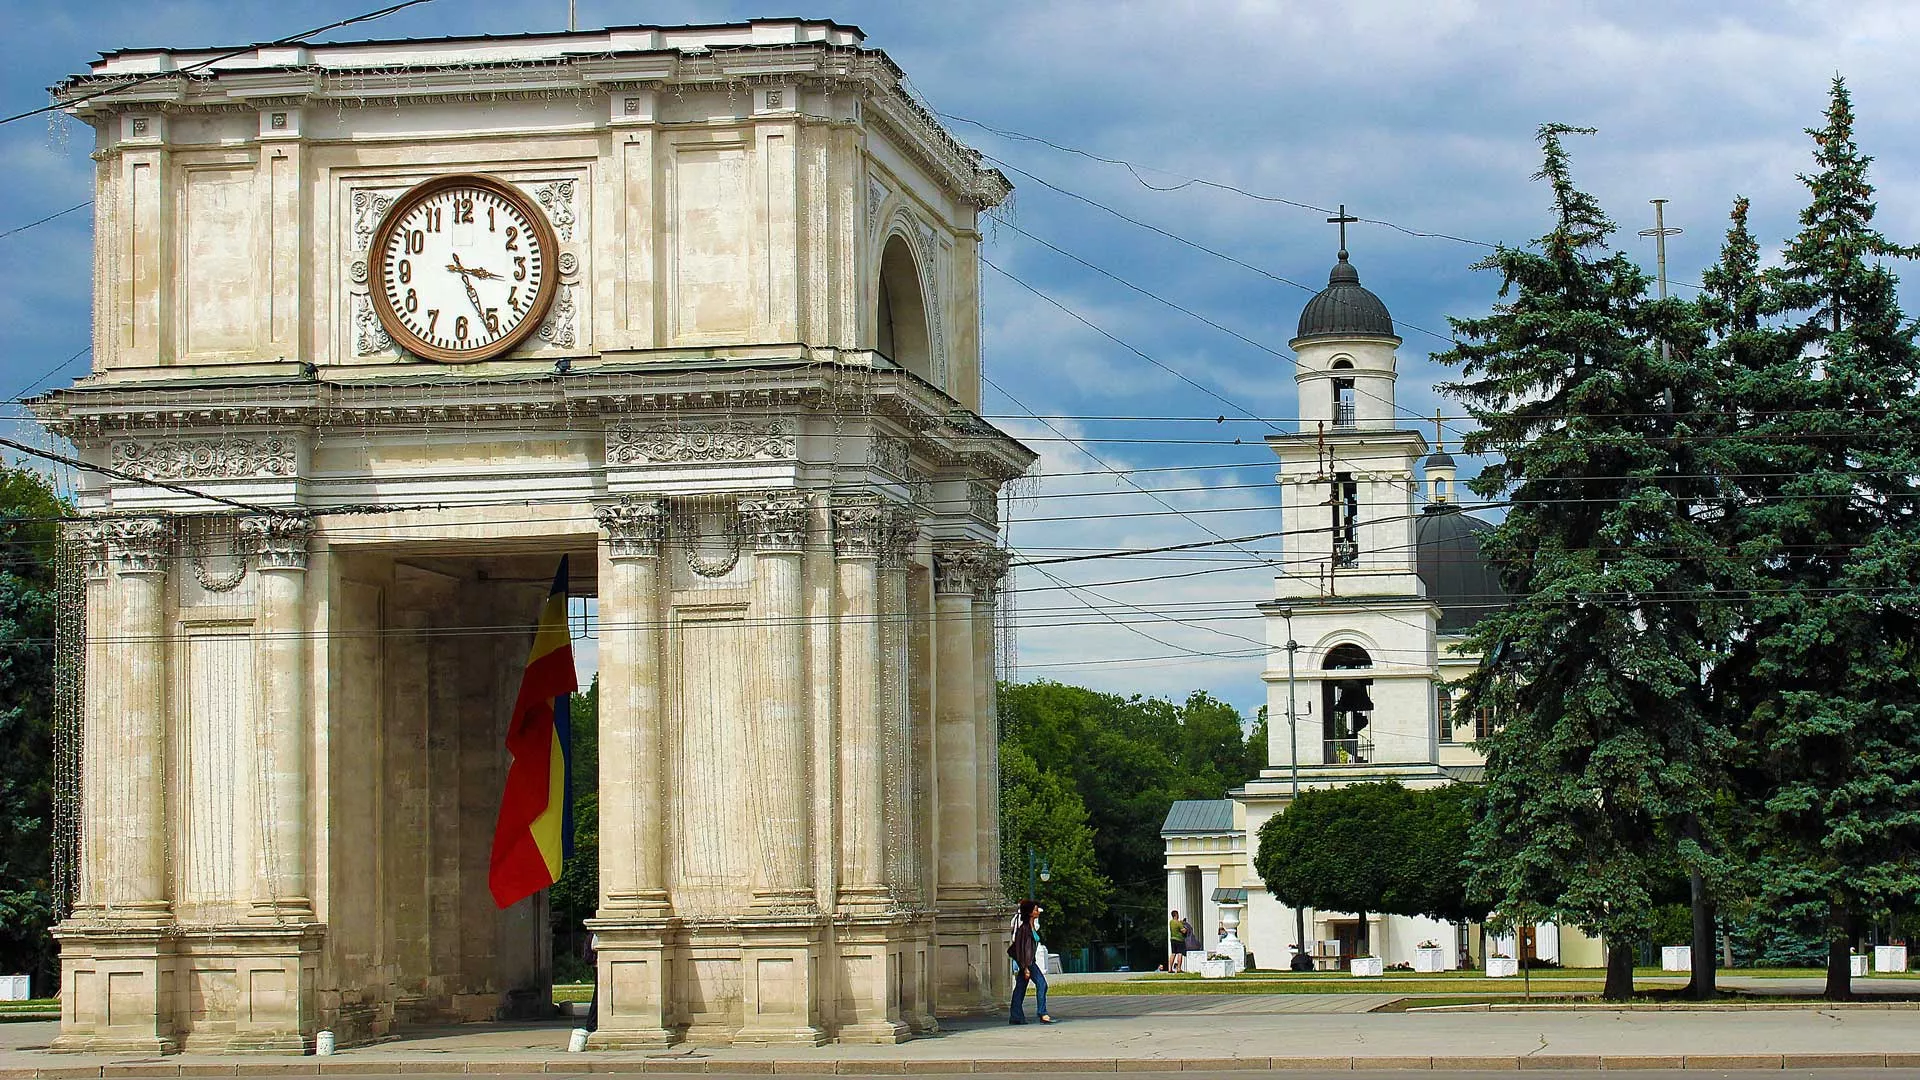 Triumphal Arch in Moldova, Europe | Architecture - Rated 3.8